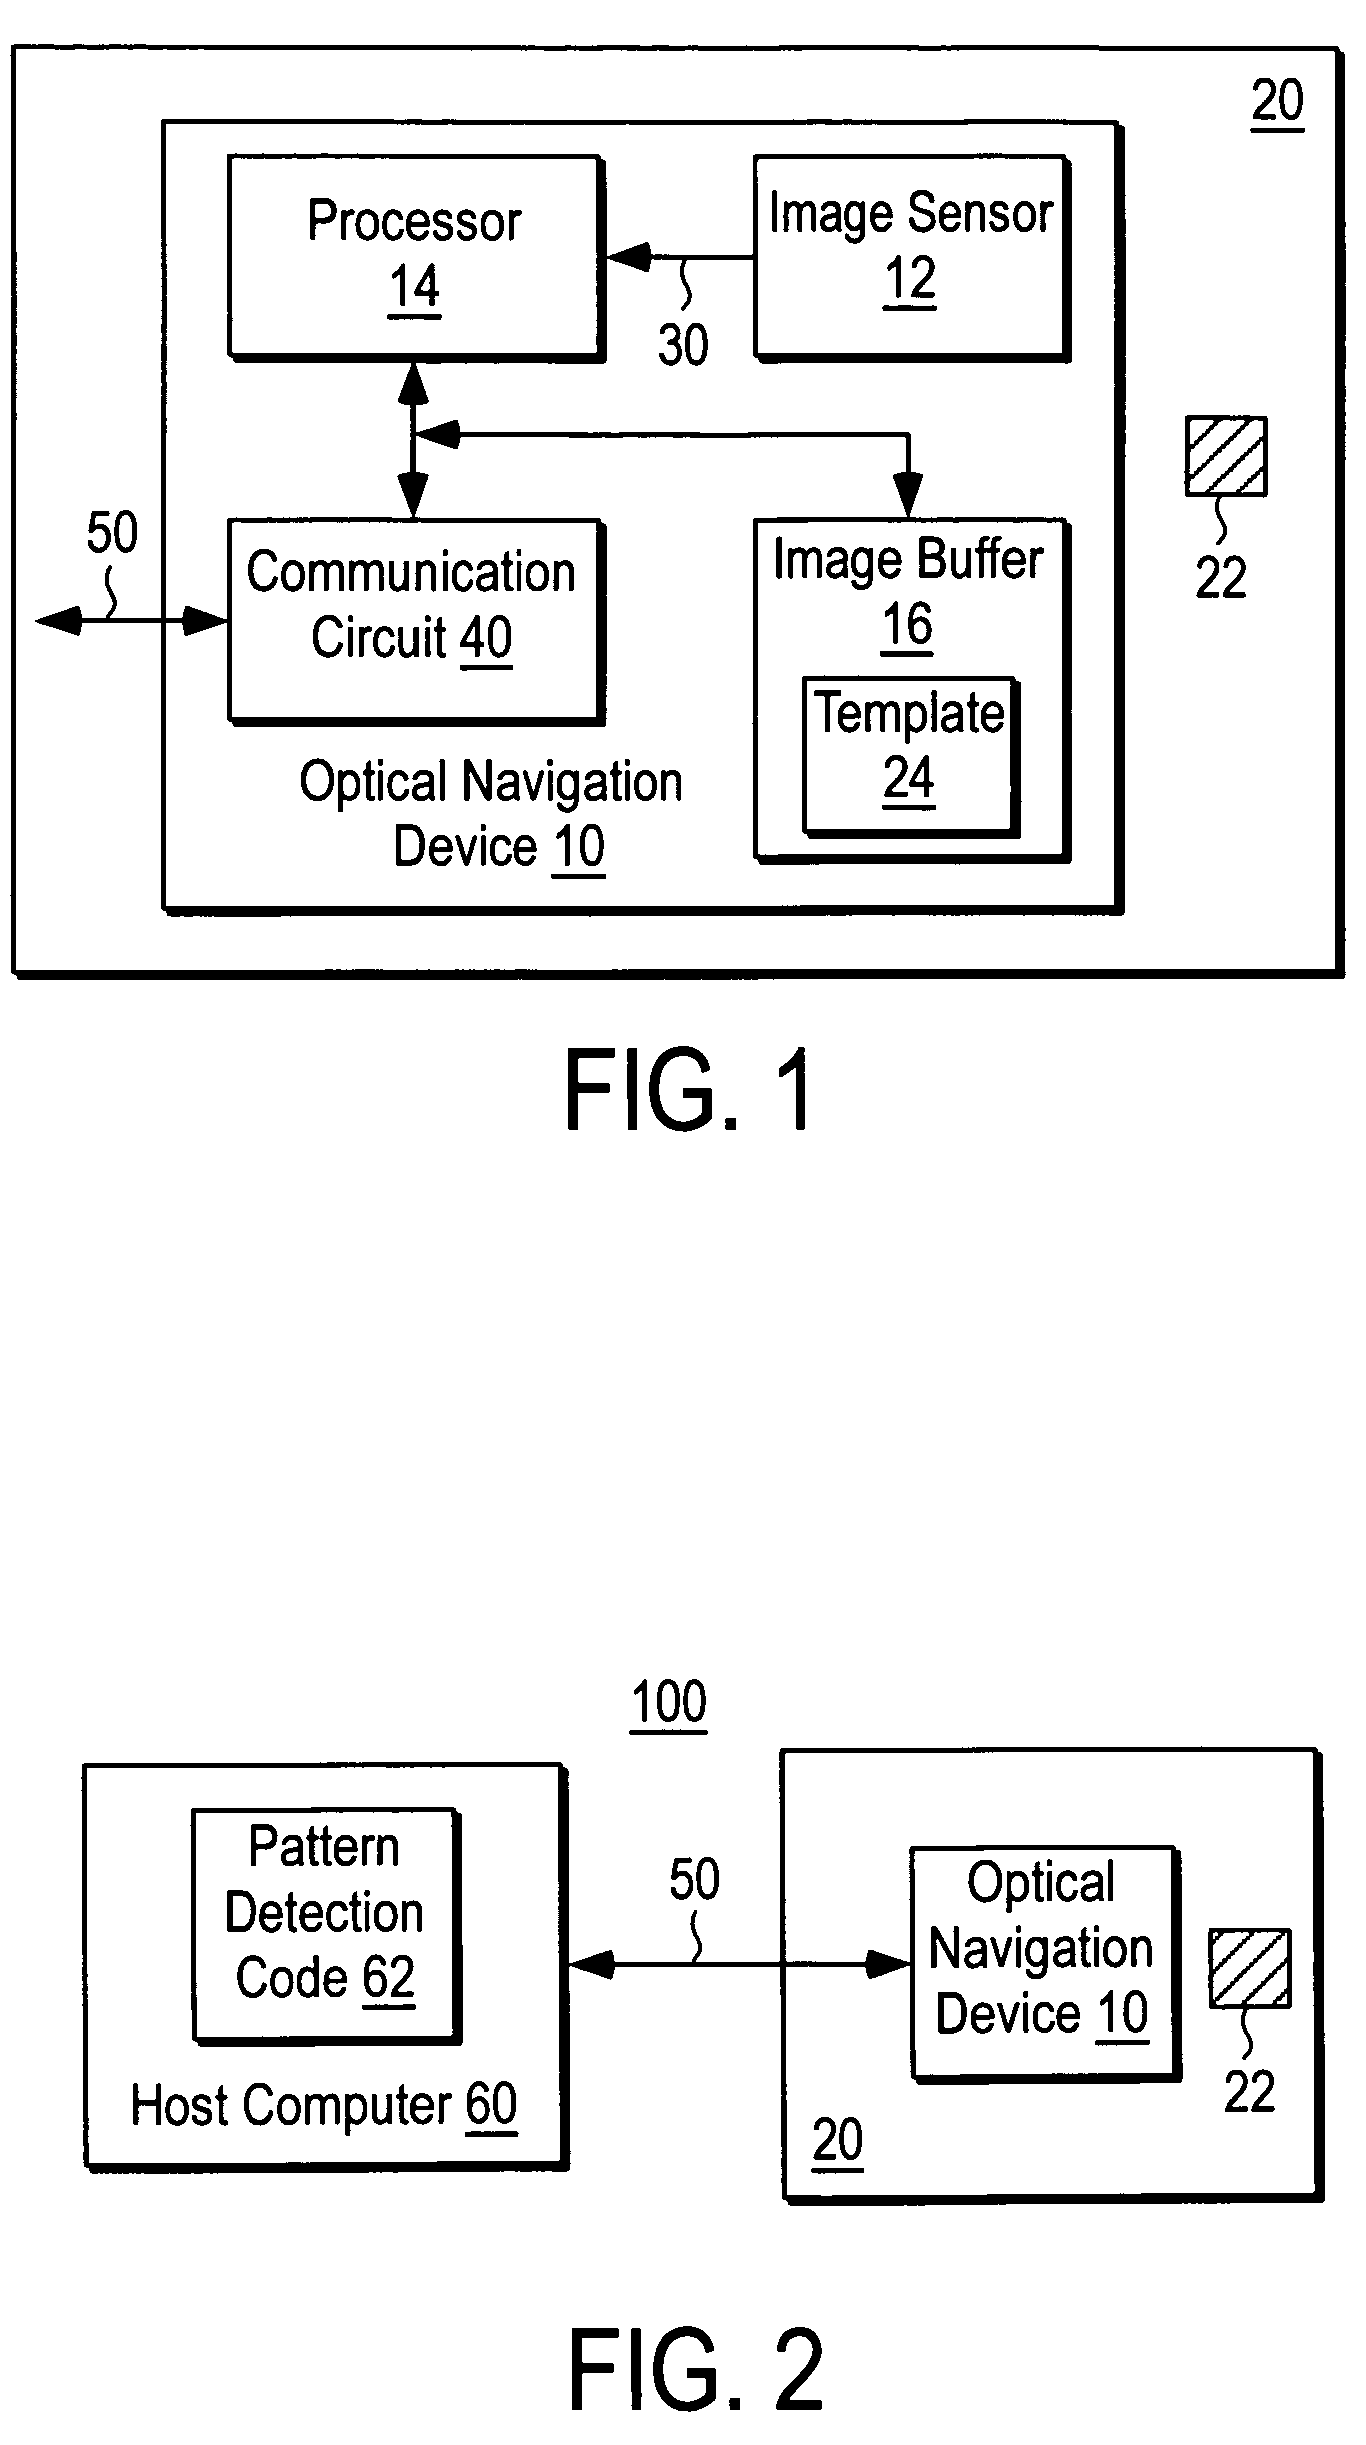 Pattern detection using an optical navigation device